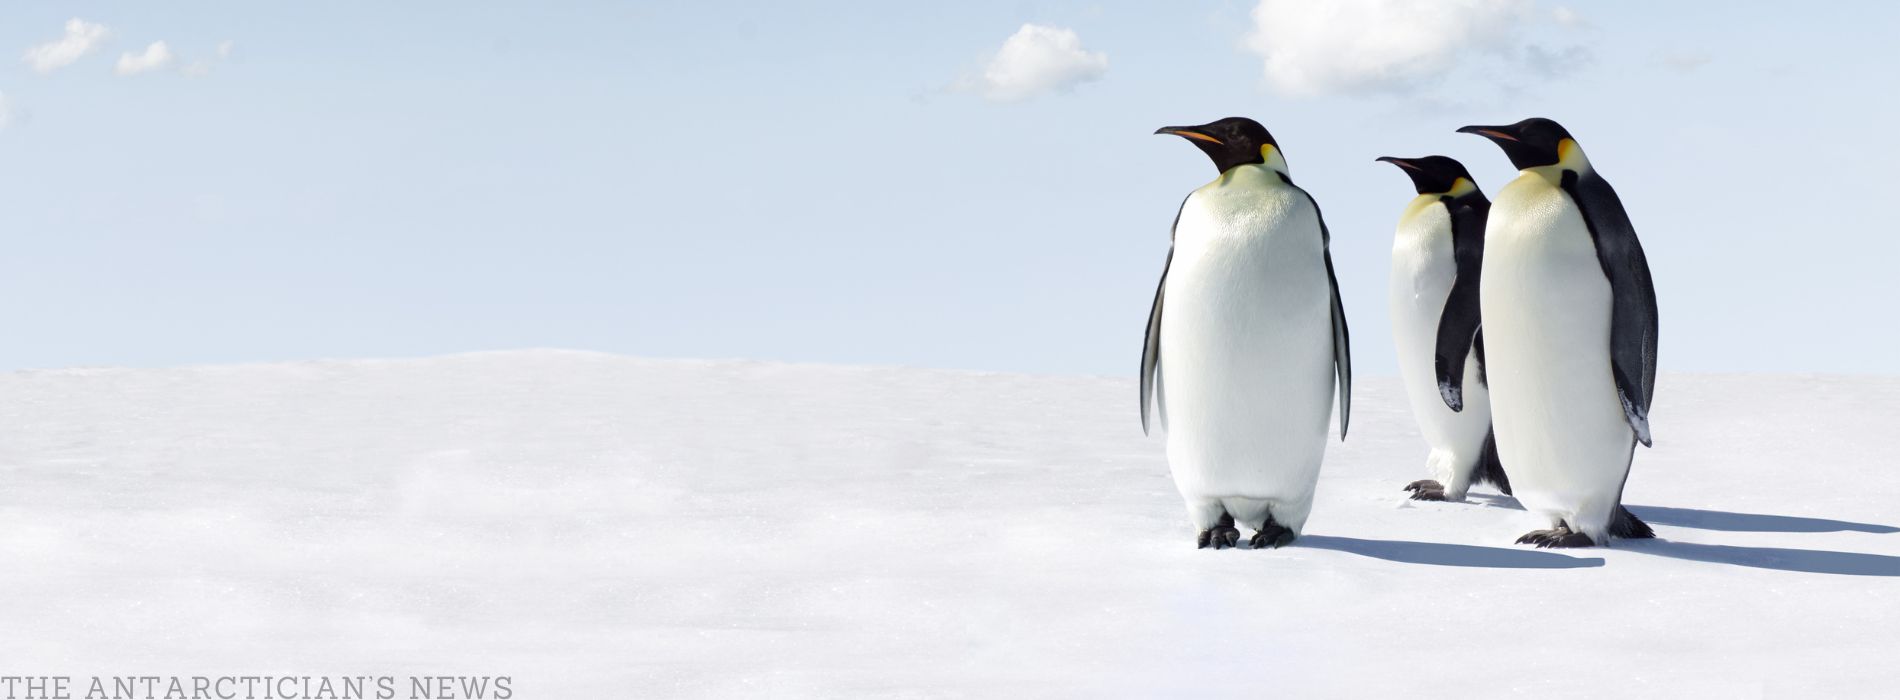 When was the penguin discovered?